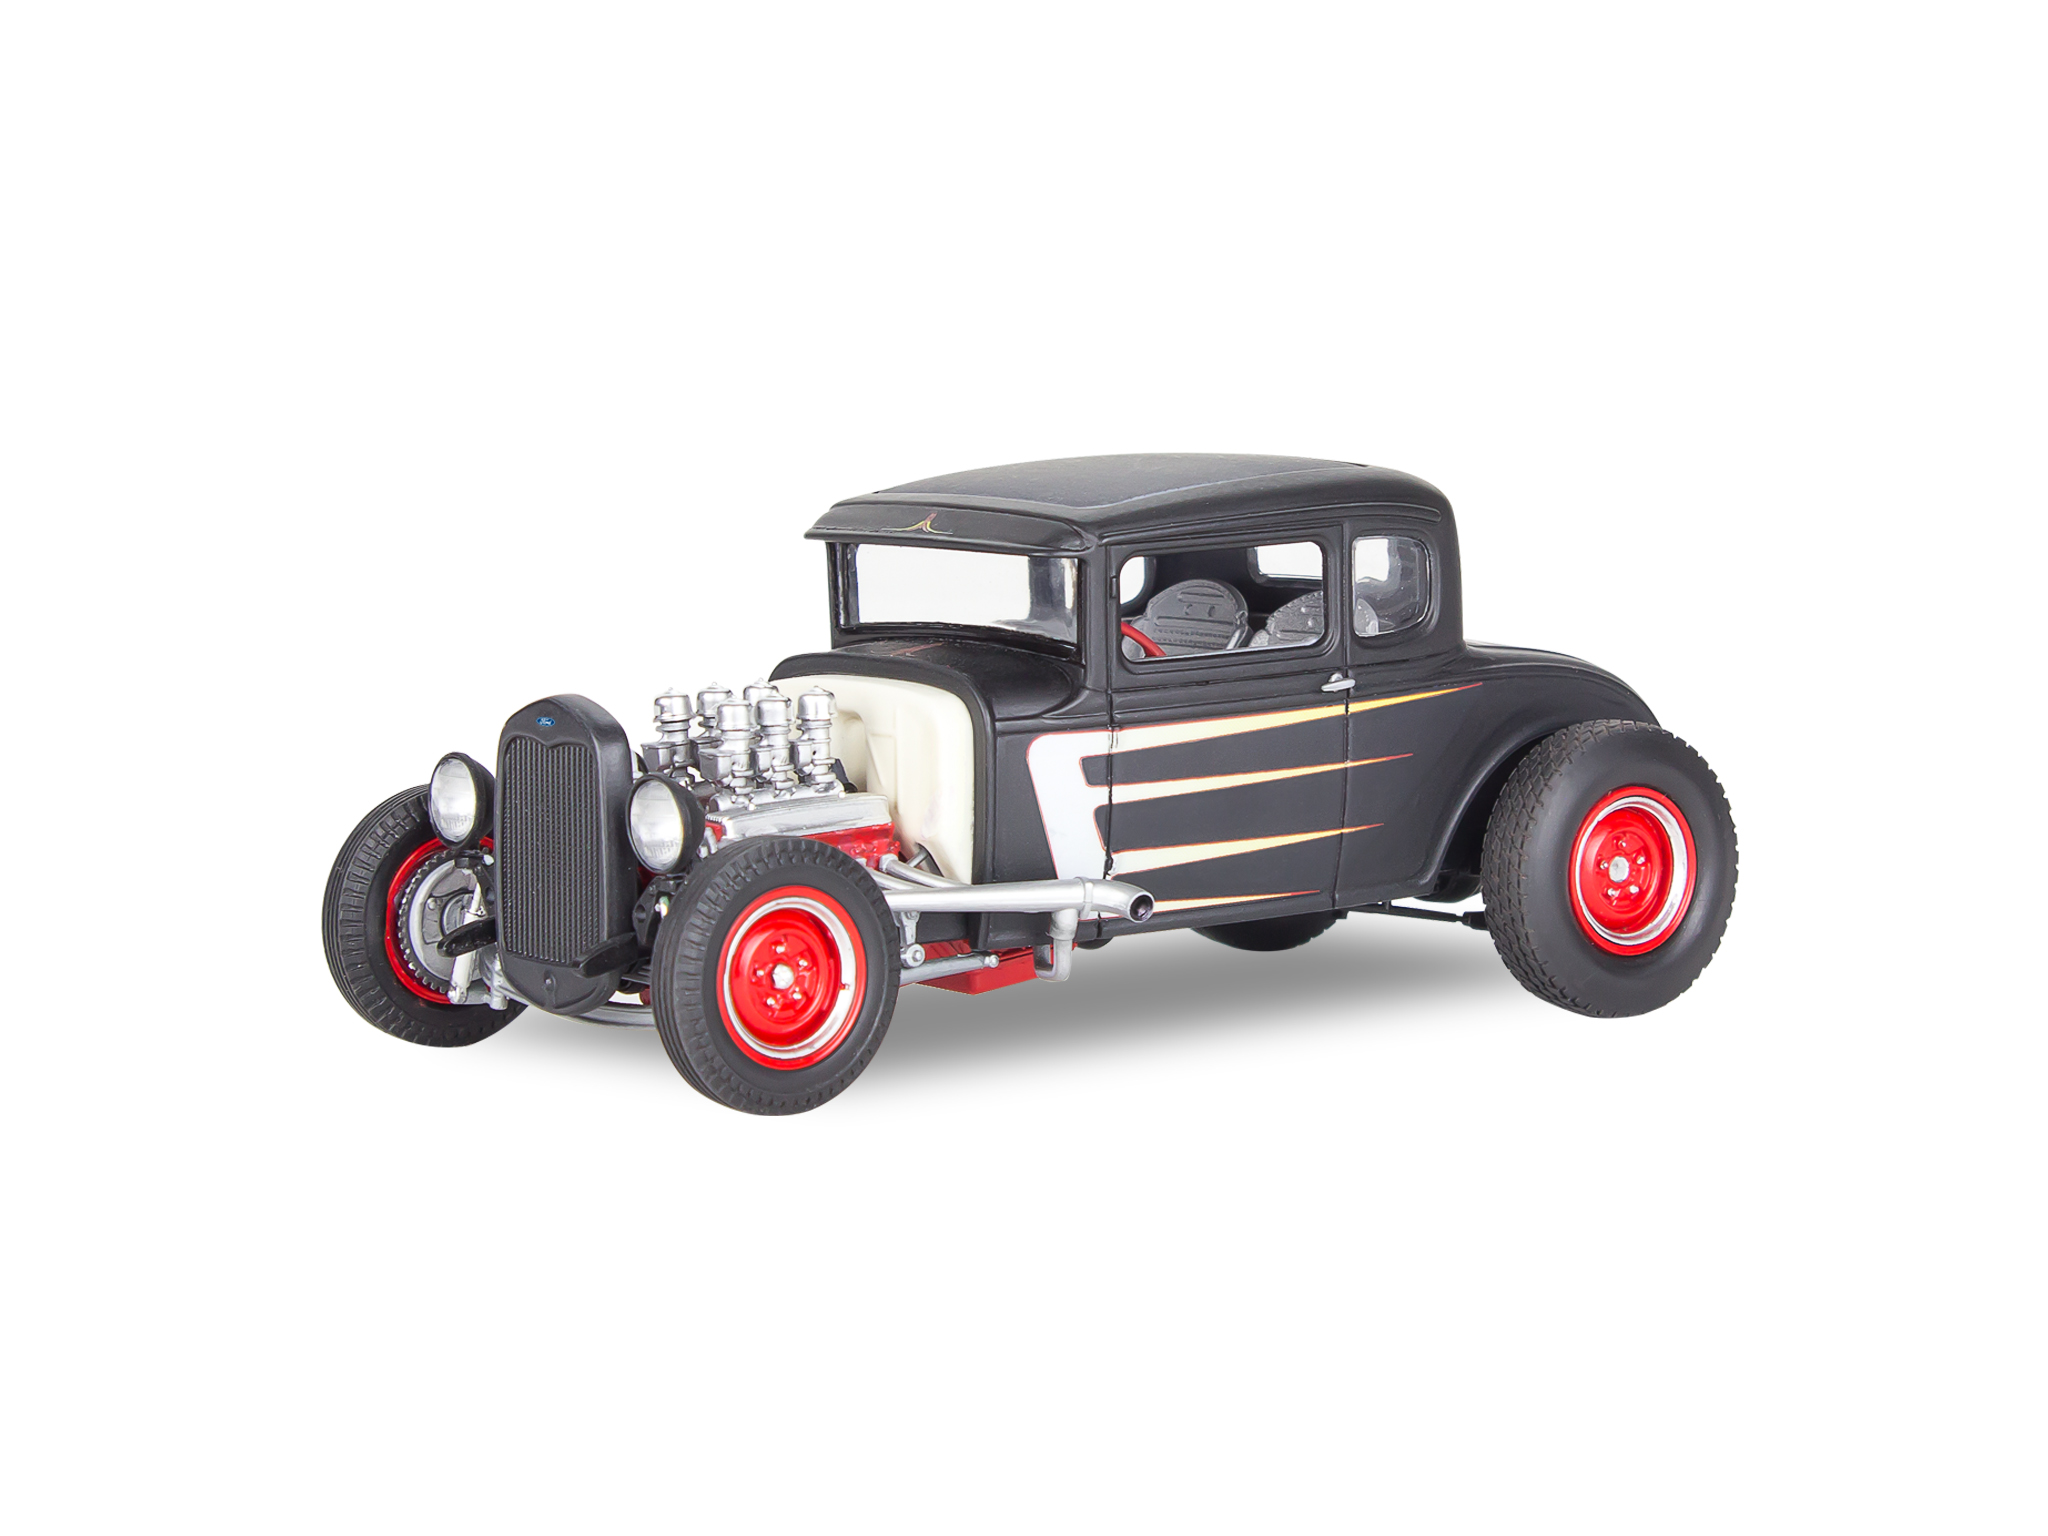 revell-85-4464-3-1930-Ford-Model-A-Coupé-Hot-Rod-2n1